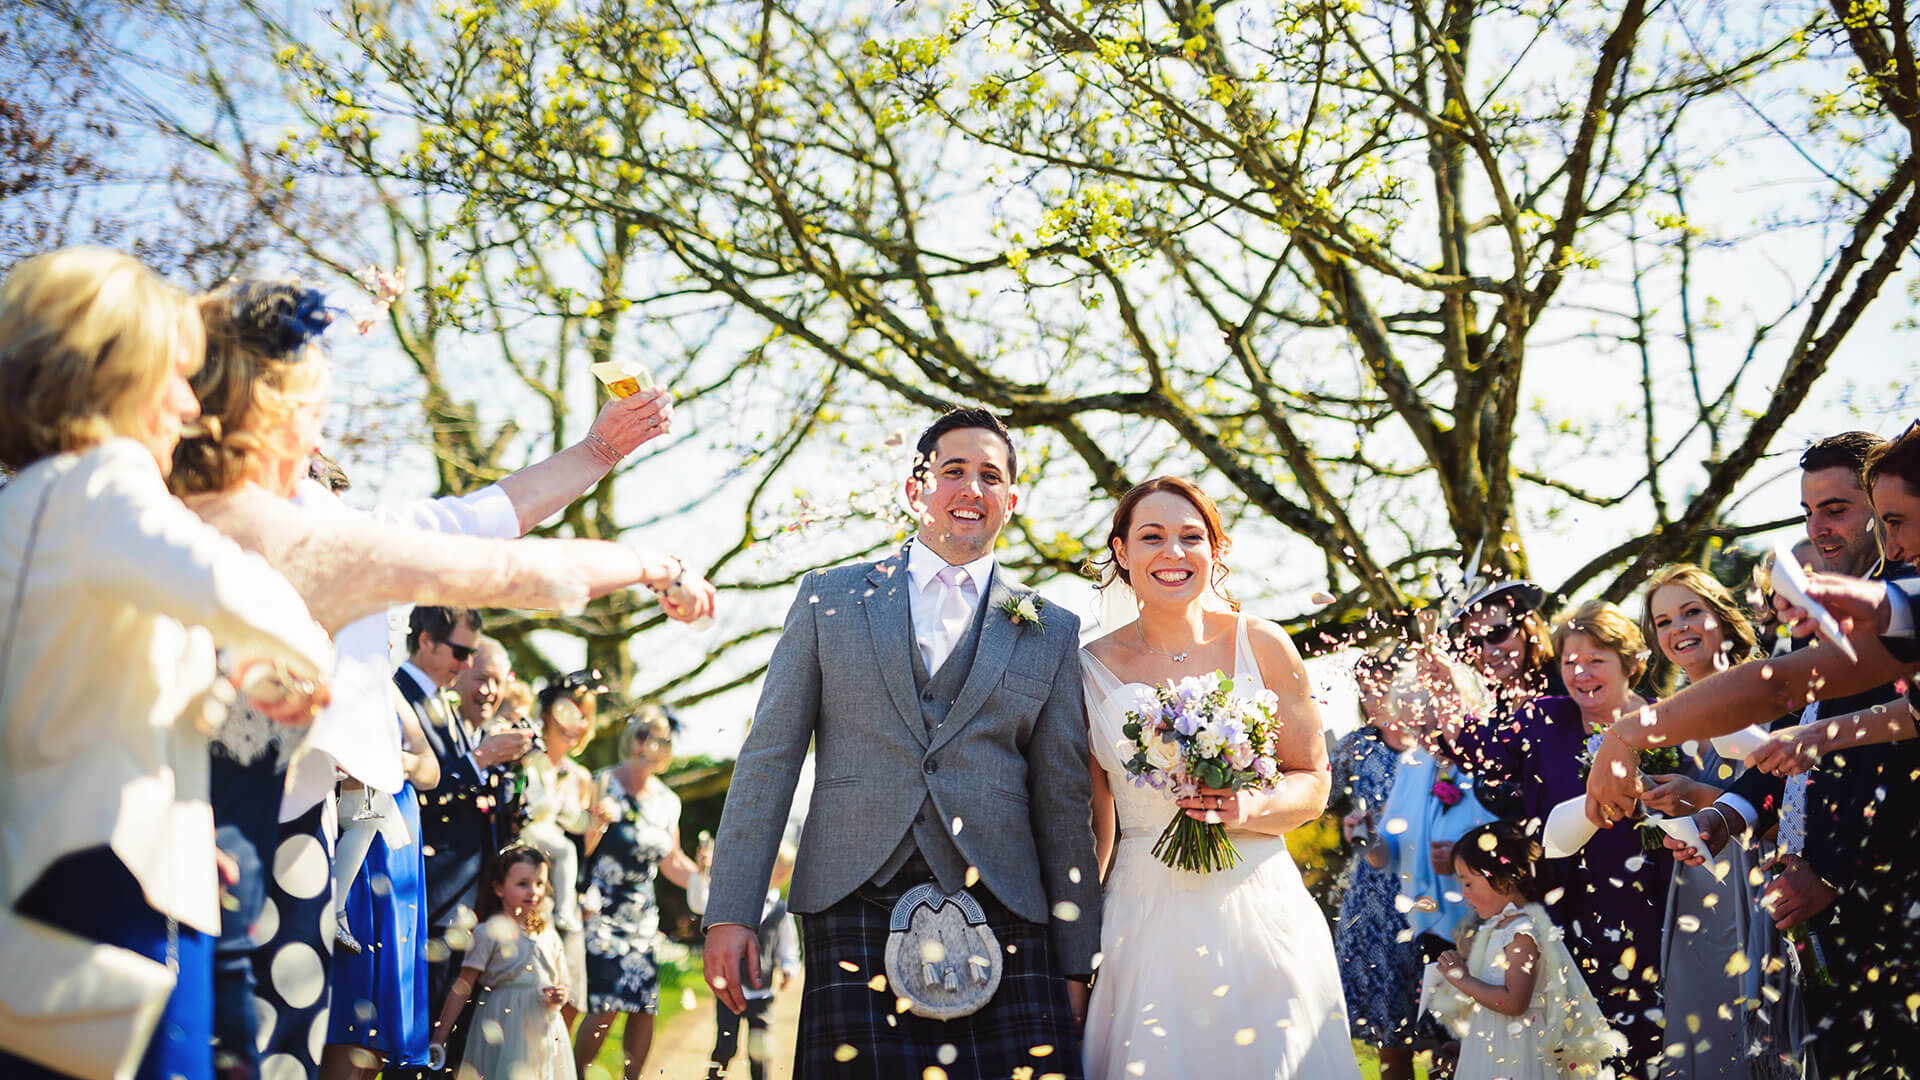 A bride and groom are congratulated with confetti after their wedding ceremony